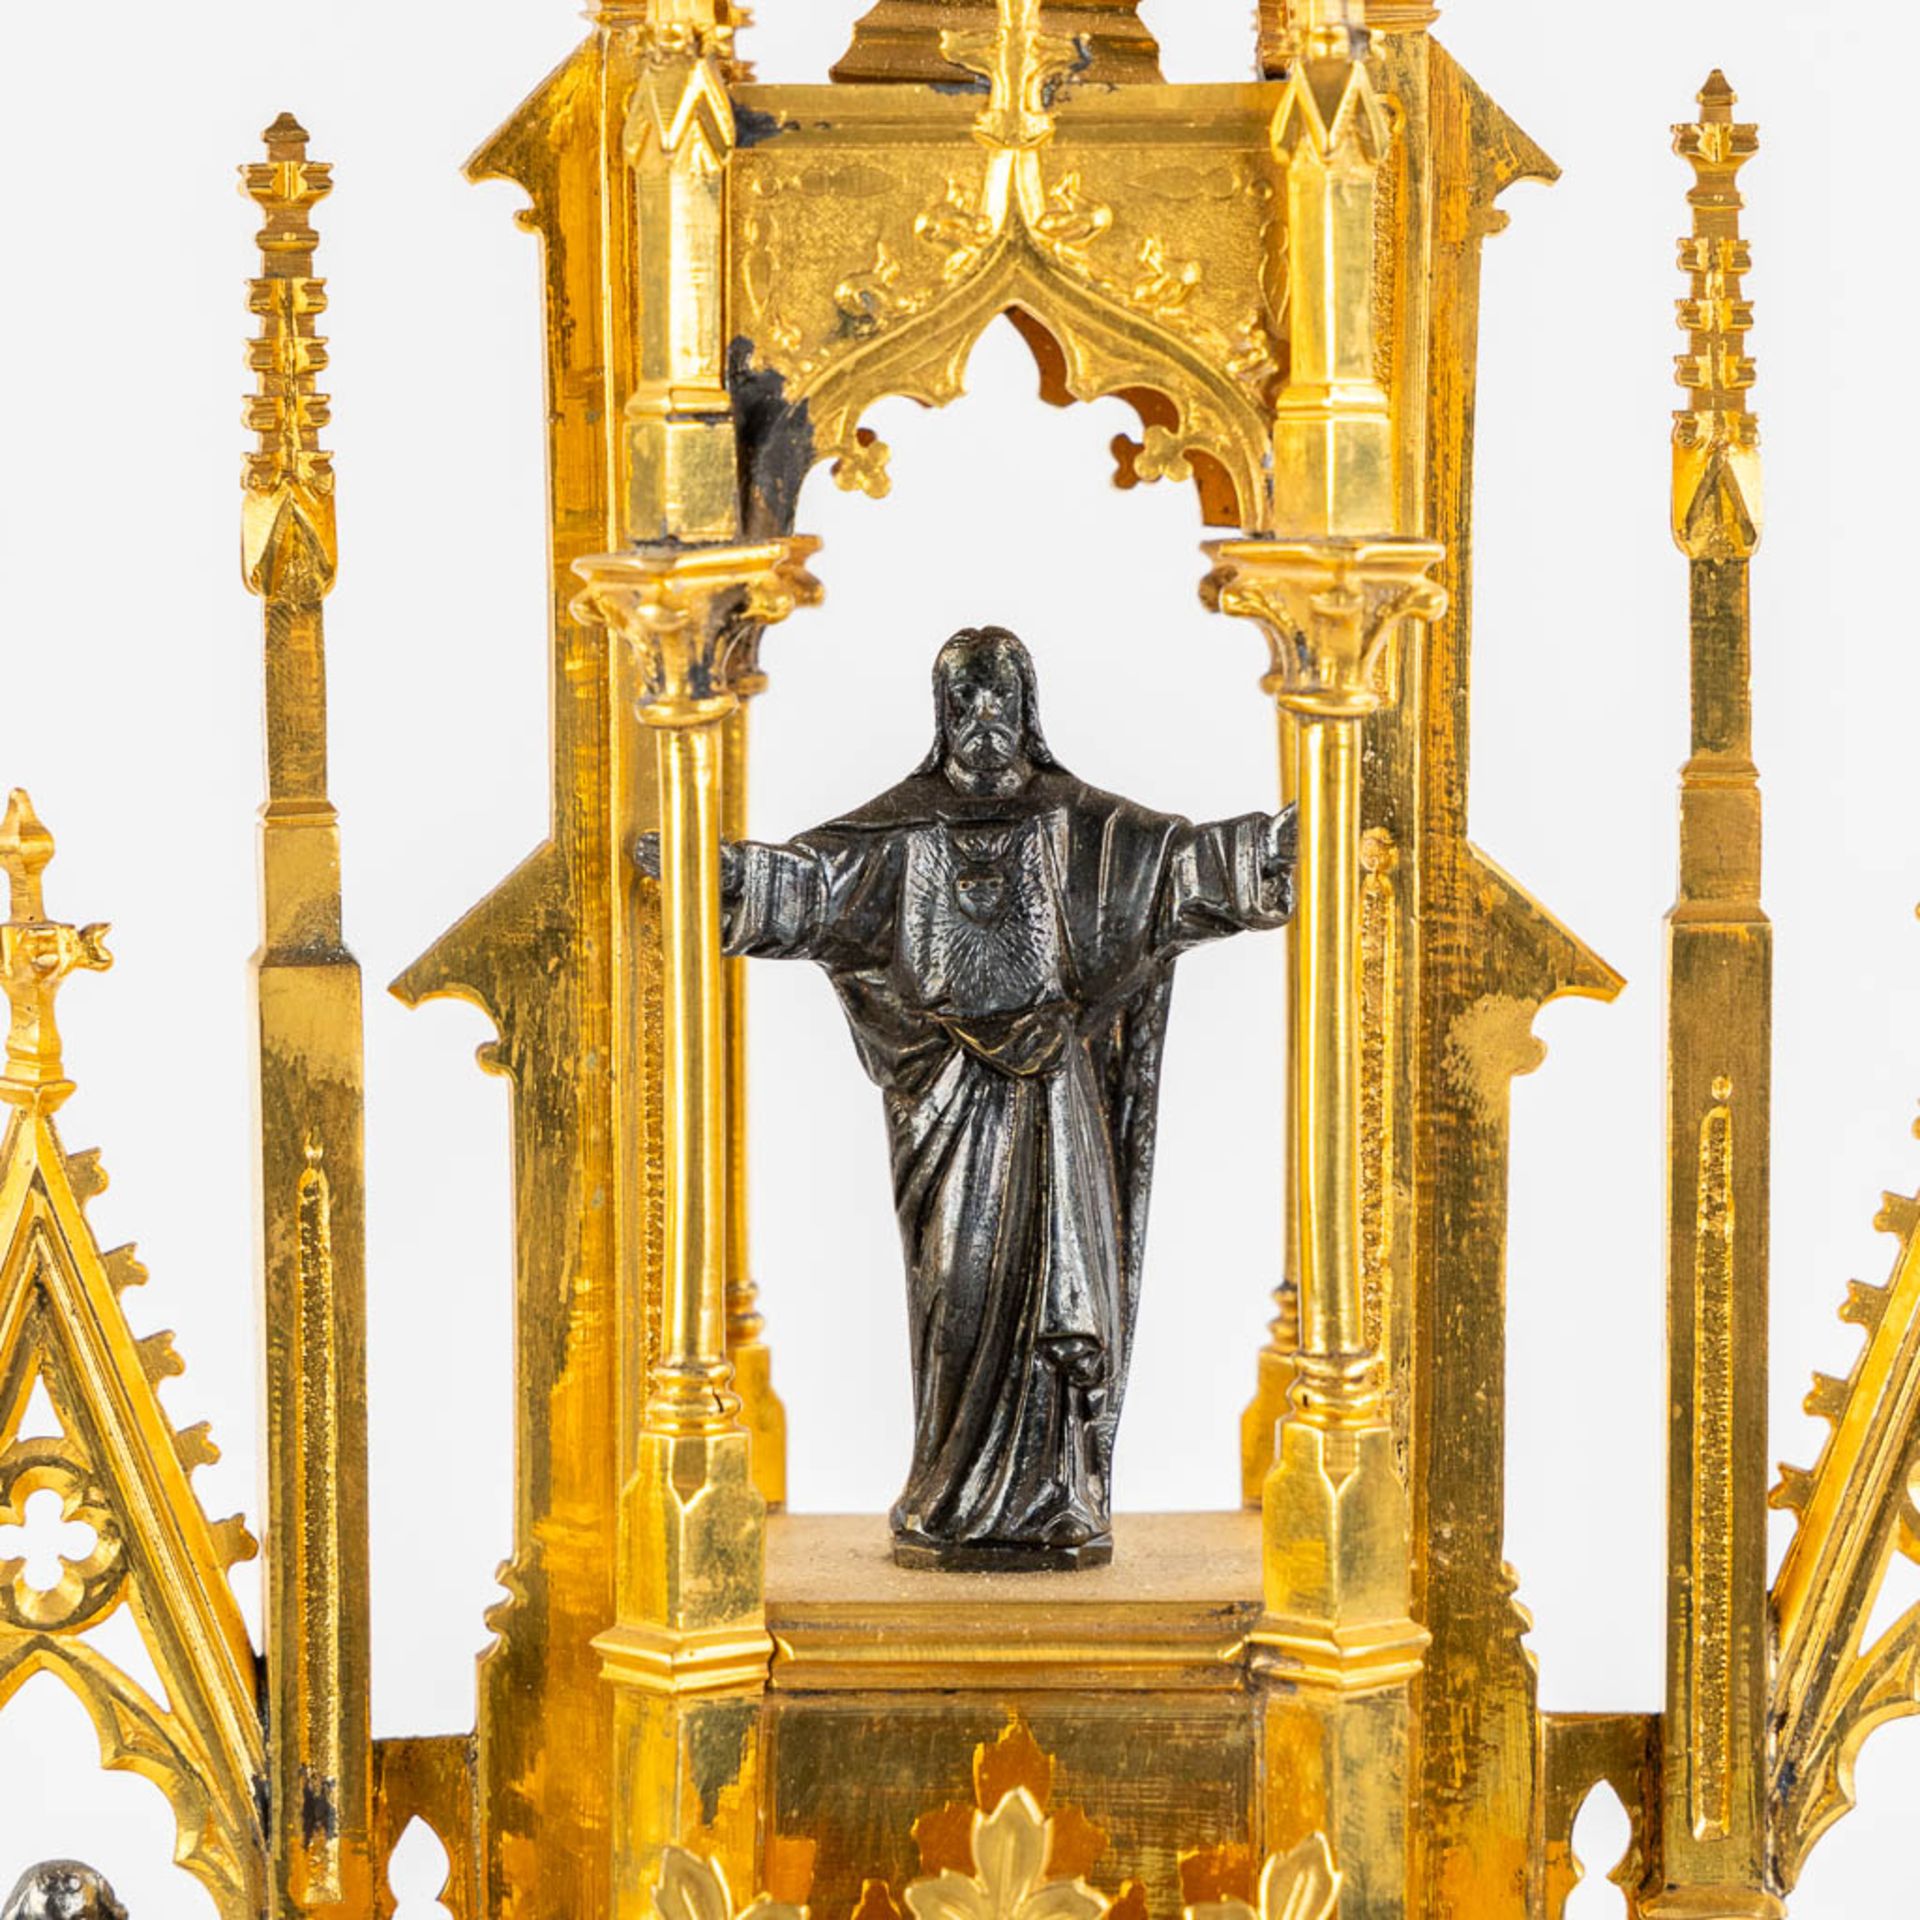 A Tower monstrance, gilt and silver plated brass, Gothic Revival. 19th C. (W:21,5 x H:58 cm) - Bild 2 aus 22